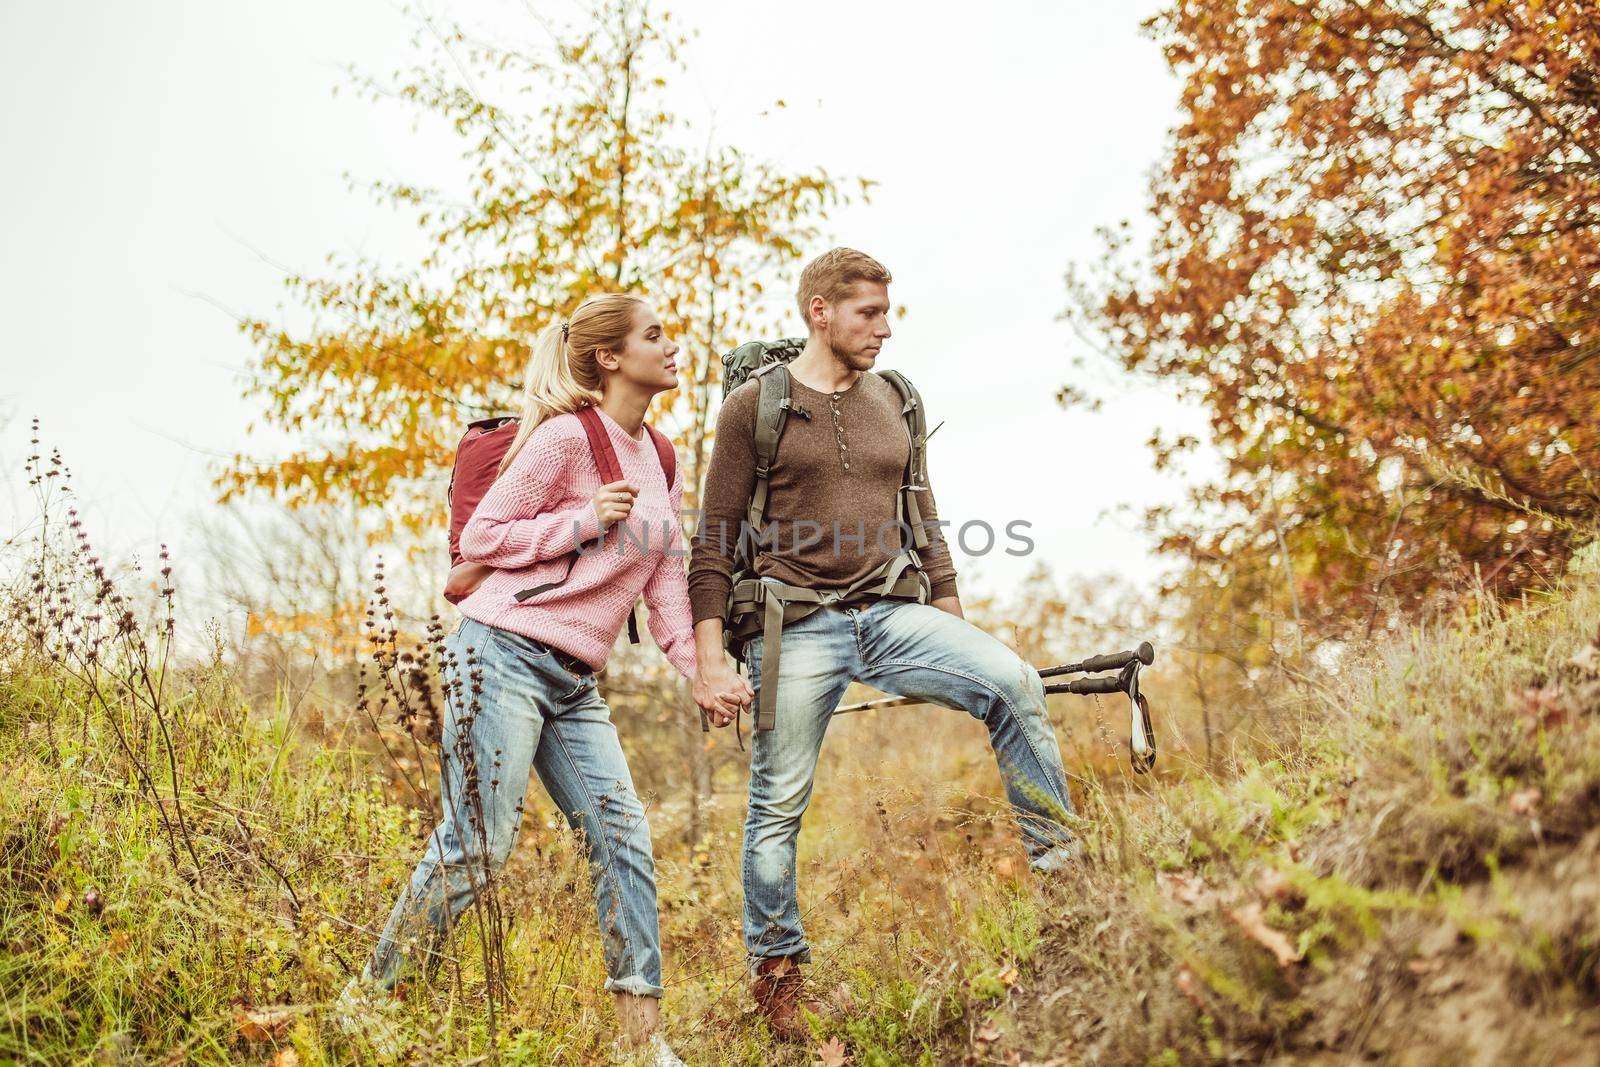 Tourists wading through the hills holding hands. A young couple of people in love checks the strength of their relationship while traveling in the wild. Hiking concept.